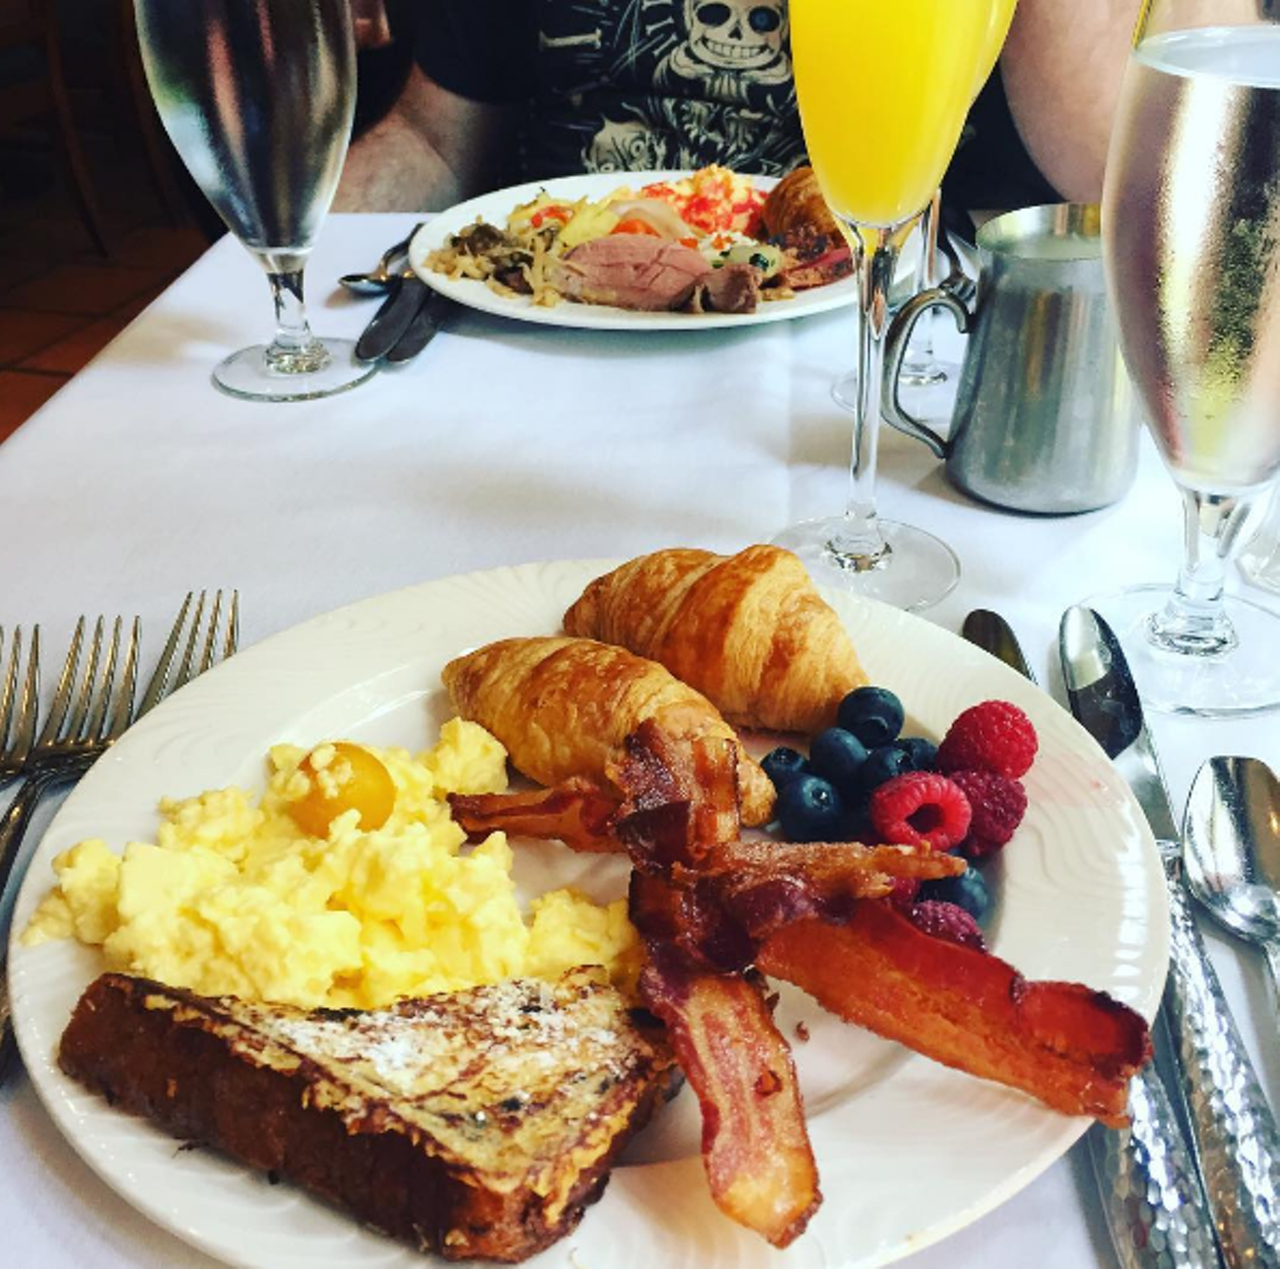 Las Canarias
112 College, (210) 518-1063,  omnihotels.com
Choose dishes from the griddle or feast on breakfast menu classics. There's no going wrong at Las Canarias.
Photo via Instagram, agwarren86